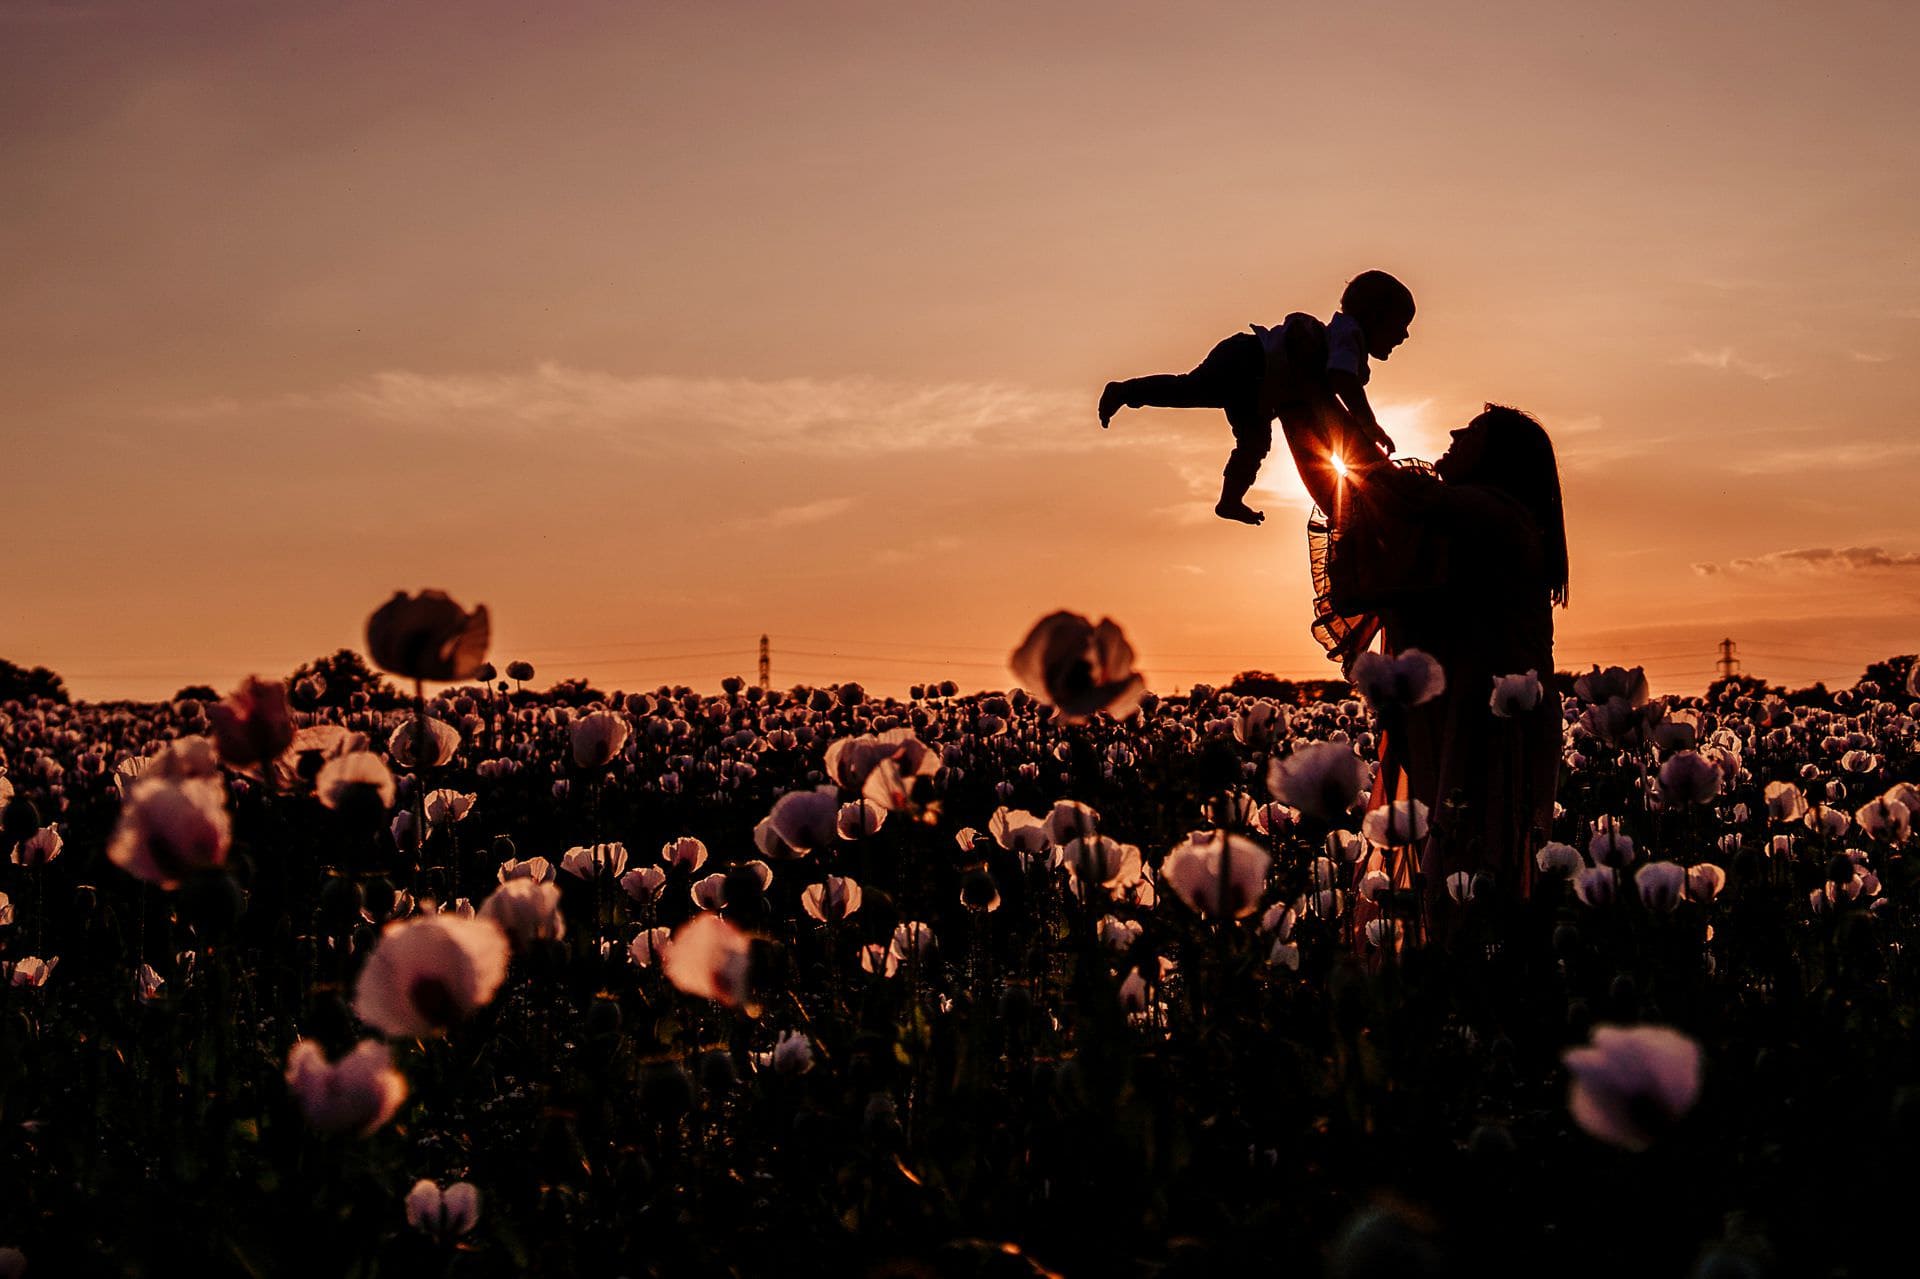 Family Photoshoots in the Poppy Fields // Round-up